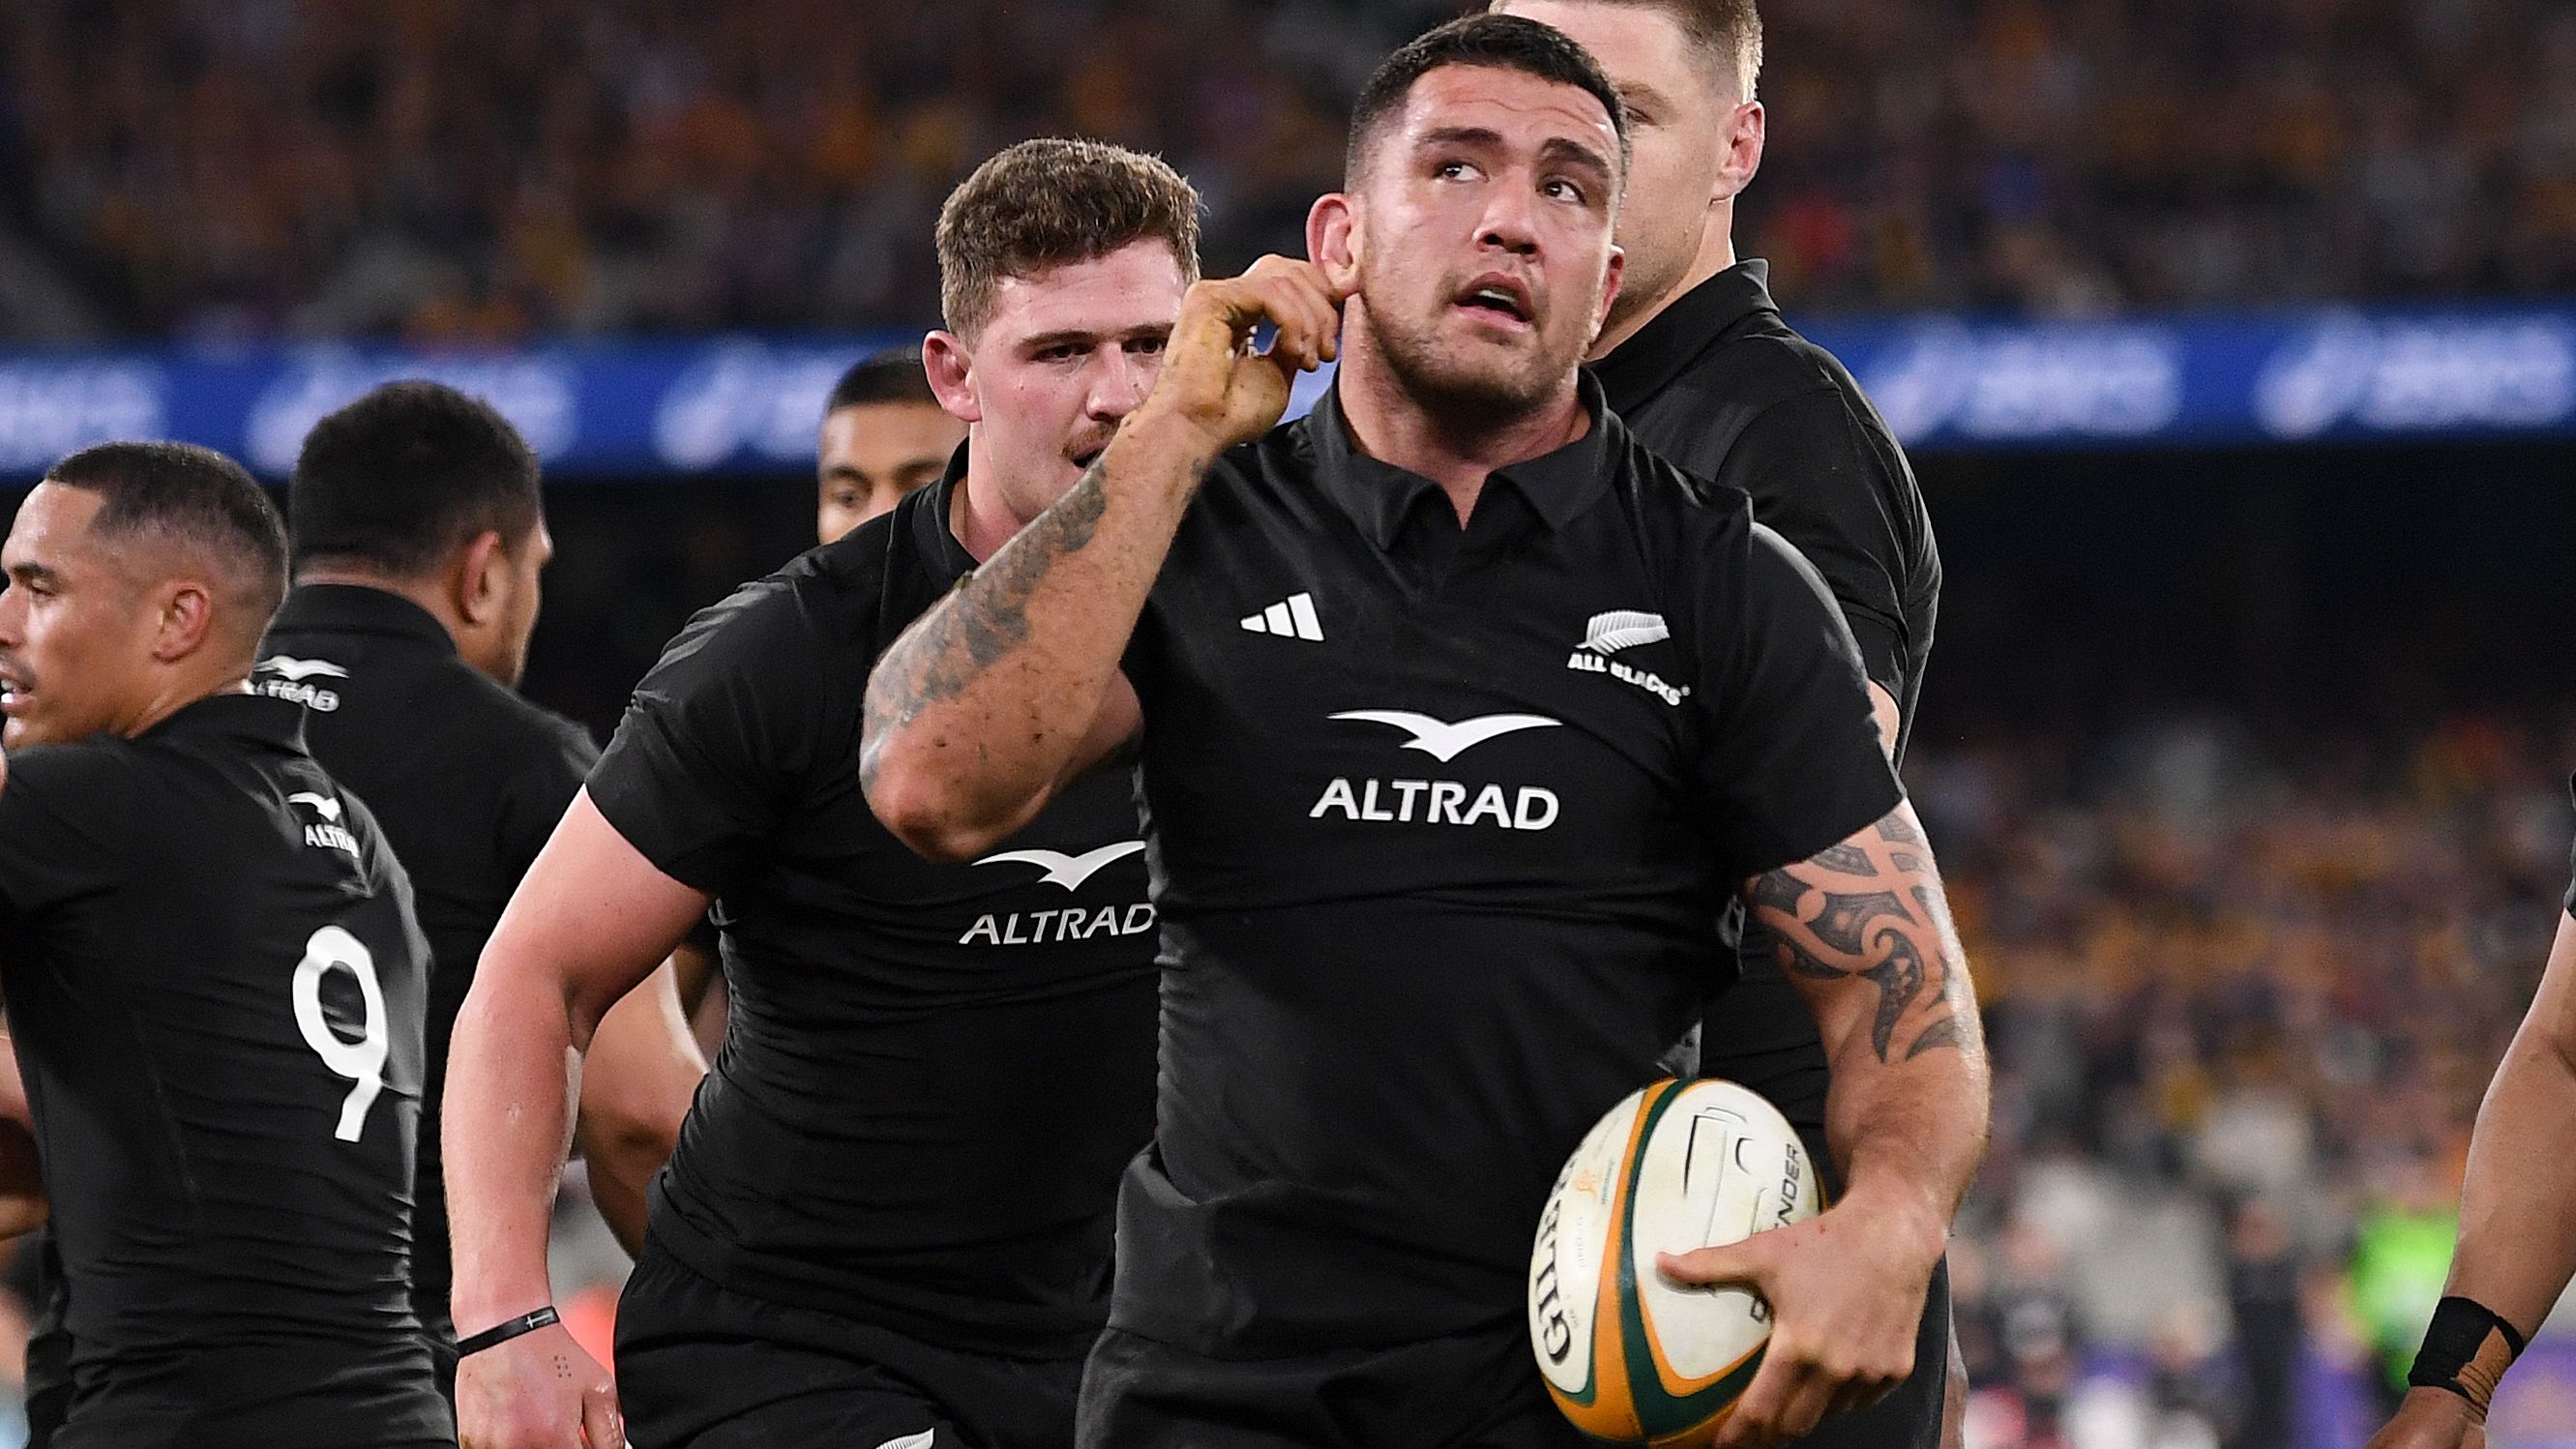 Codie Taylor of the All Blacks celebrates a try.